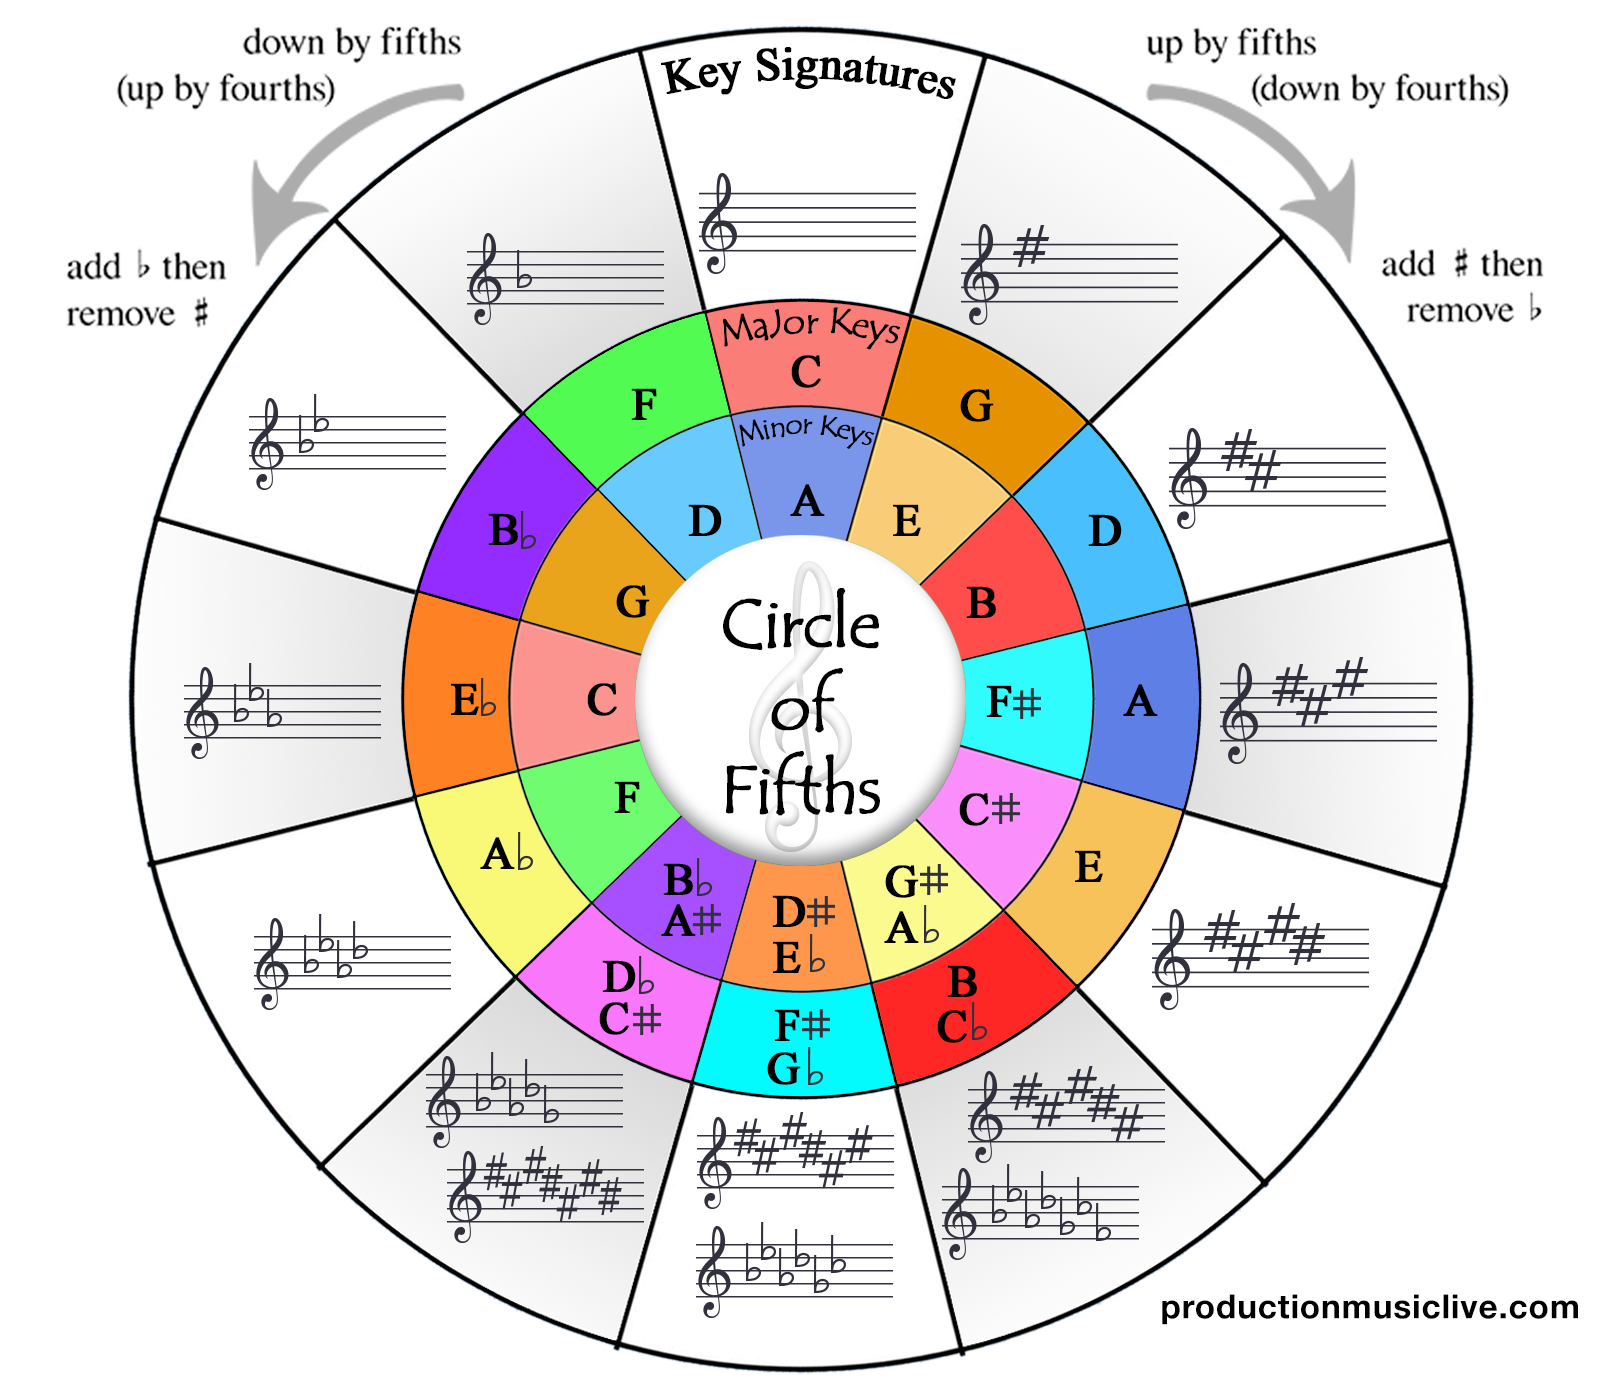 What Is The Circle Of Fifths